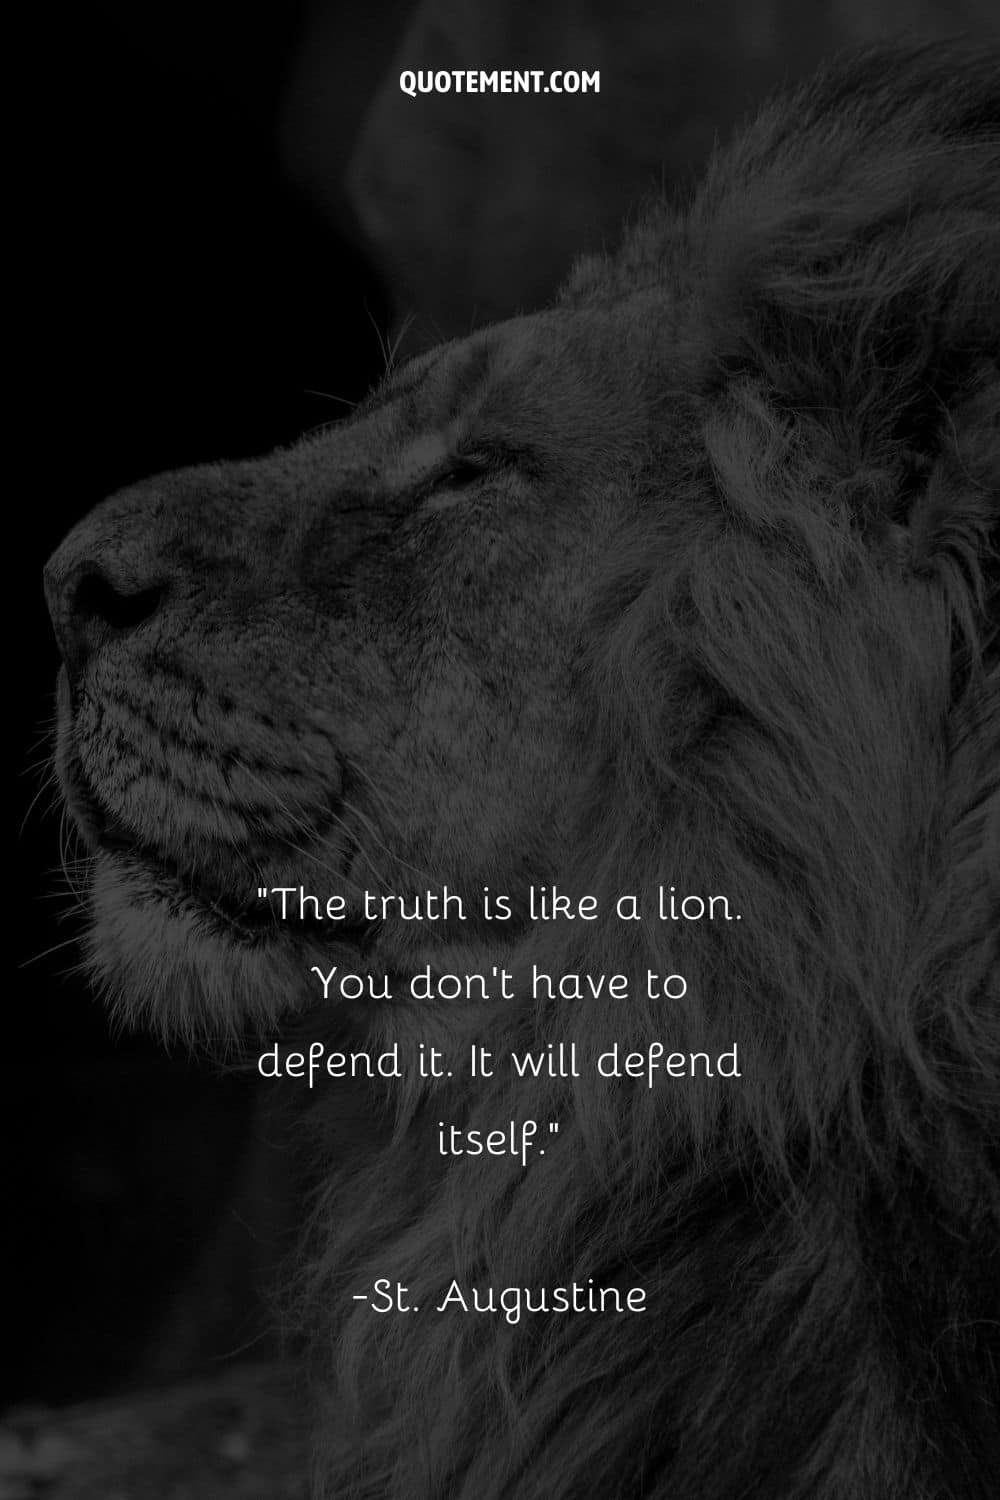 The truth is like a lion. You don’t have to defend it. It will defend itself